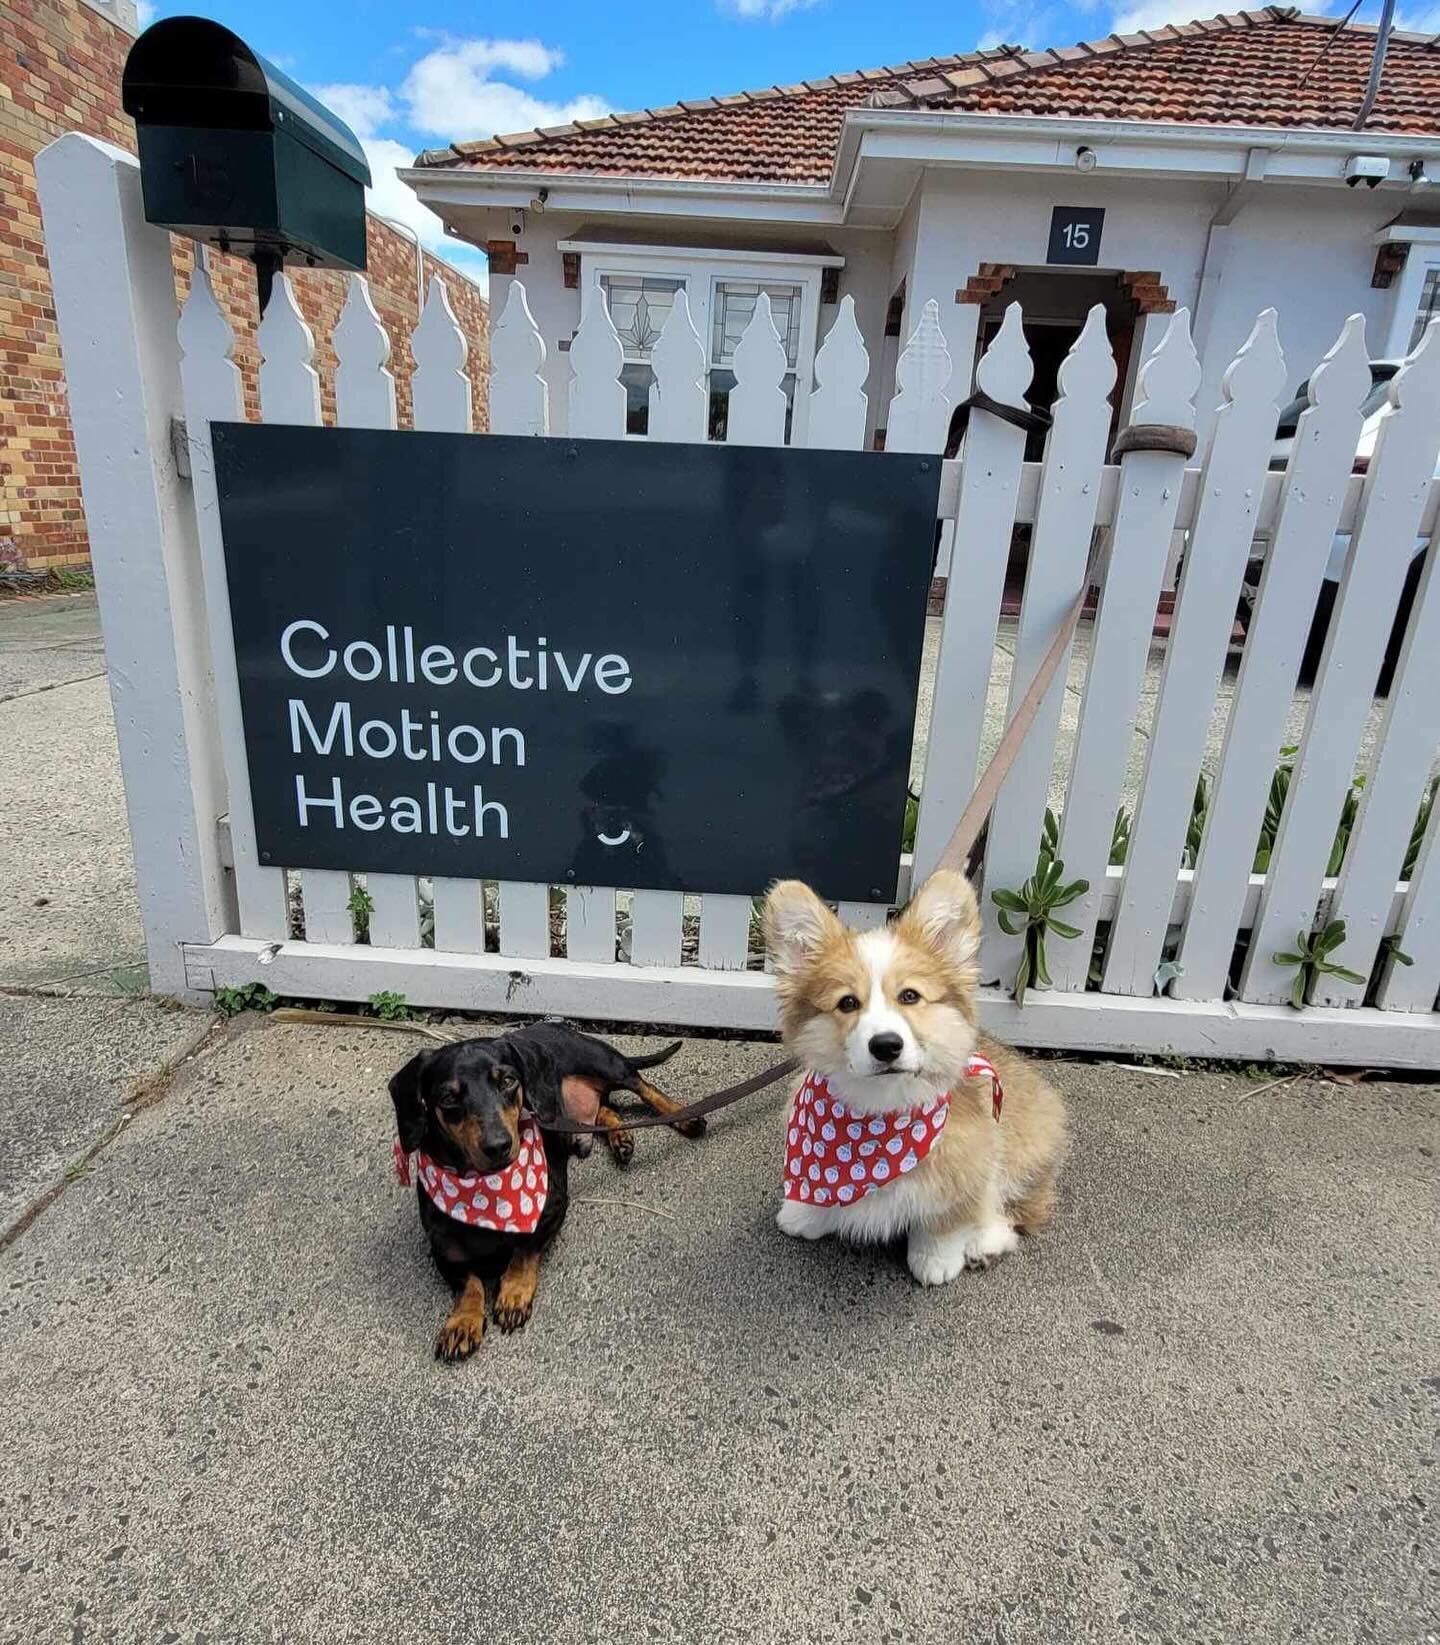 Merry Christmas from the team at Collective Motion and our little helpers 🎄🎅🤶🐶
.
.
.
.
#bentleigh #shoplocal #shopbentleigh #osteo #osteopathy #osteopath #dietician #dietitian #massage #wellness #wellbeing #pilates #reformerpilates #christmas #ch